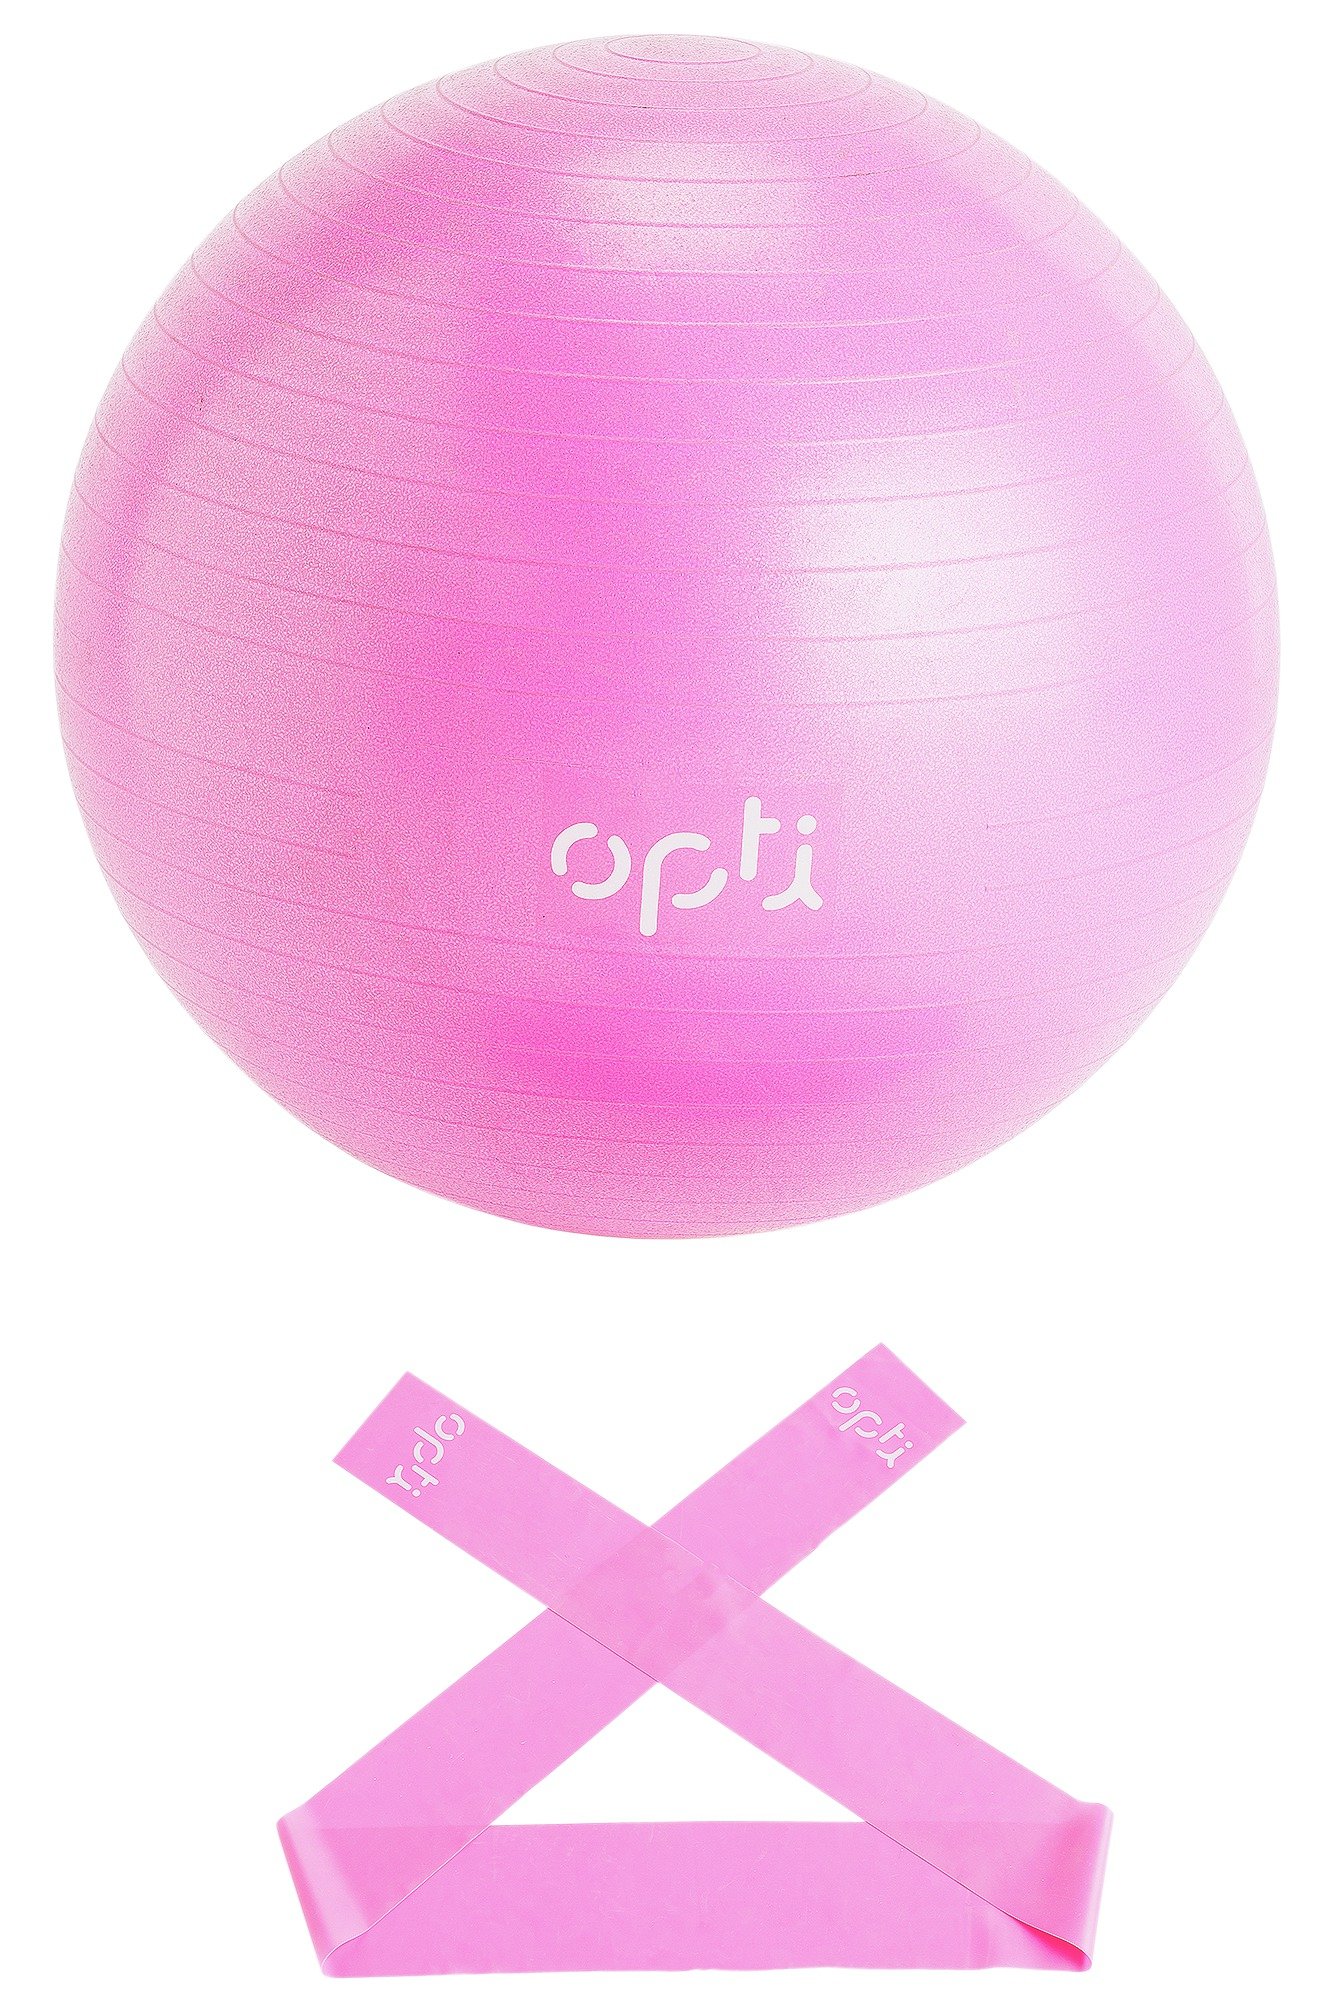 Opti Pink Gym Ball with Bands - 65cm